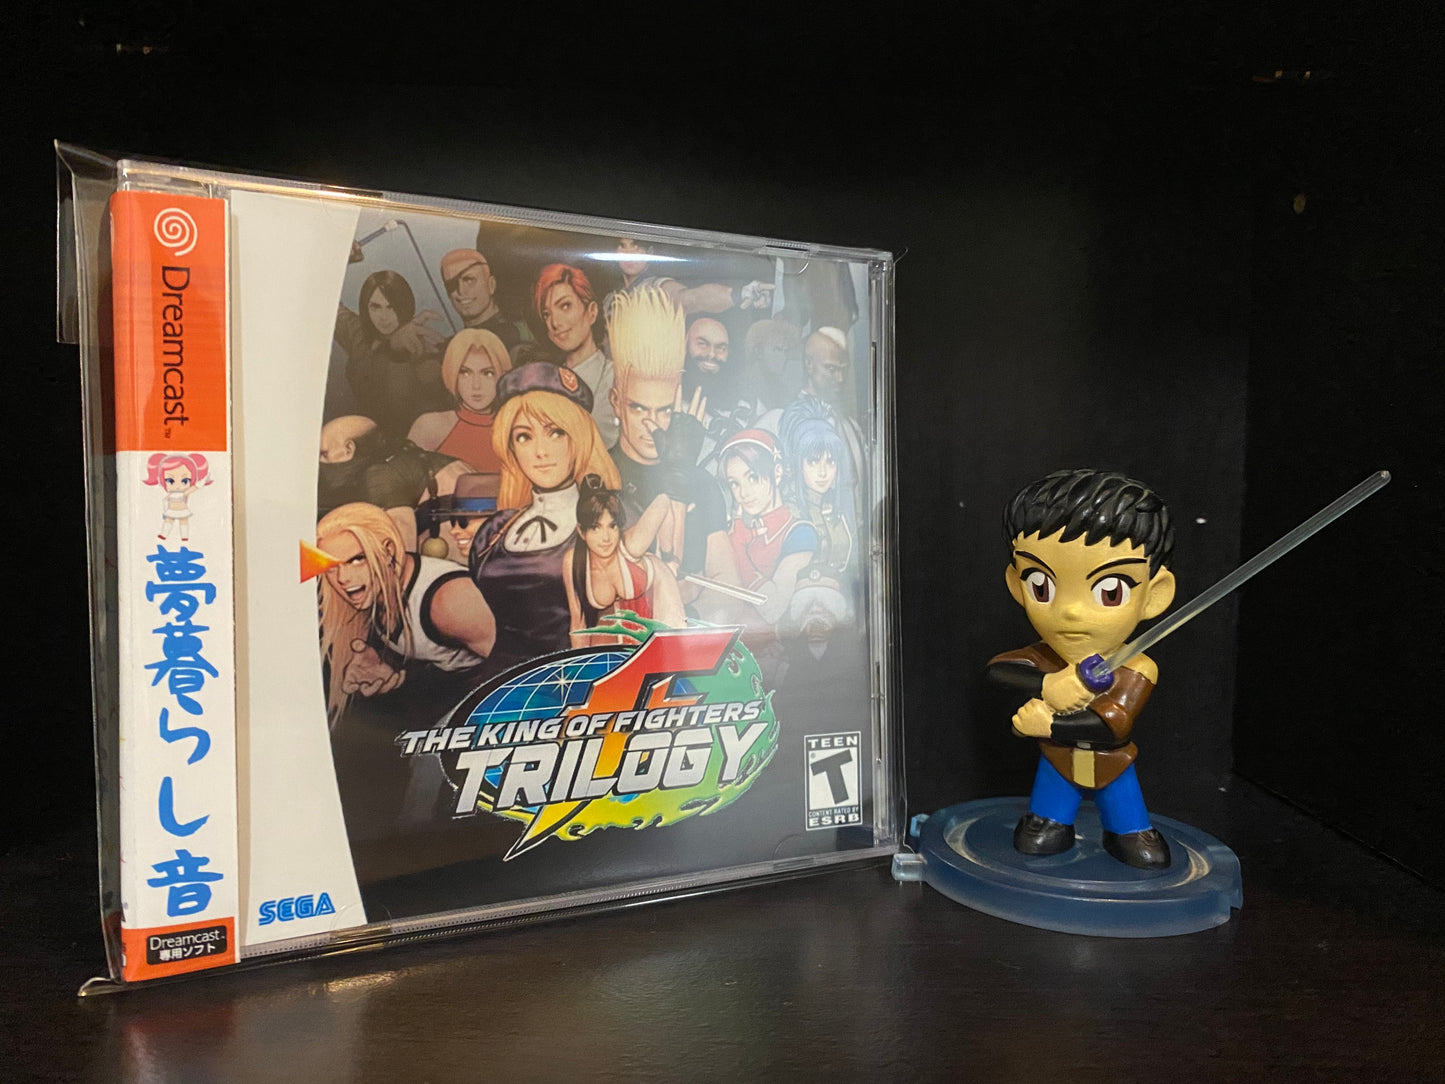 The King of Fighters Trilogy (KOF 99,2000 & 2002) [Sega Dreamcast] Reproduction